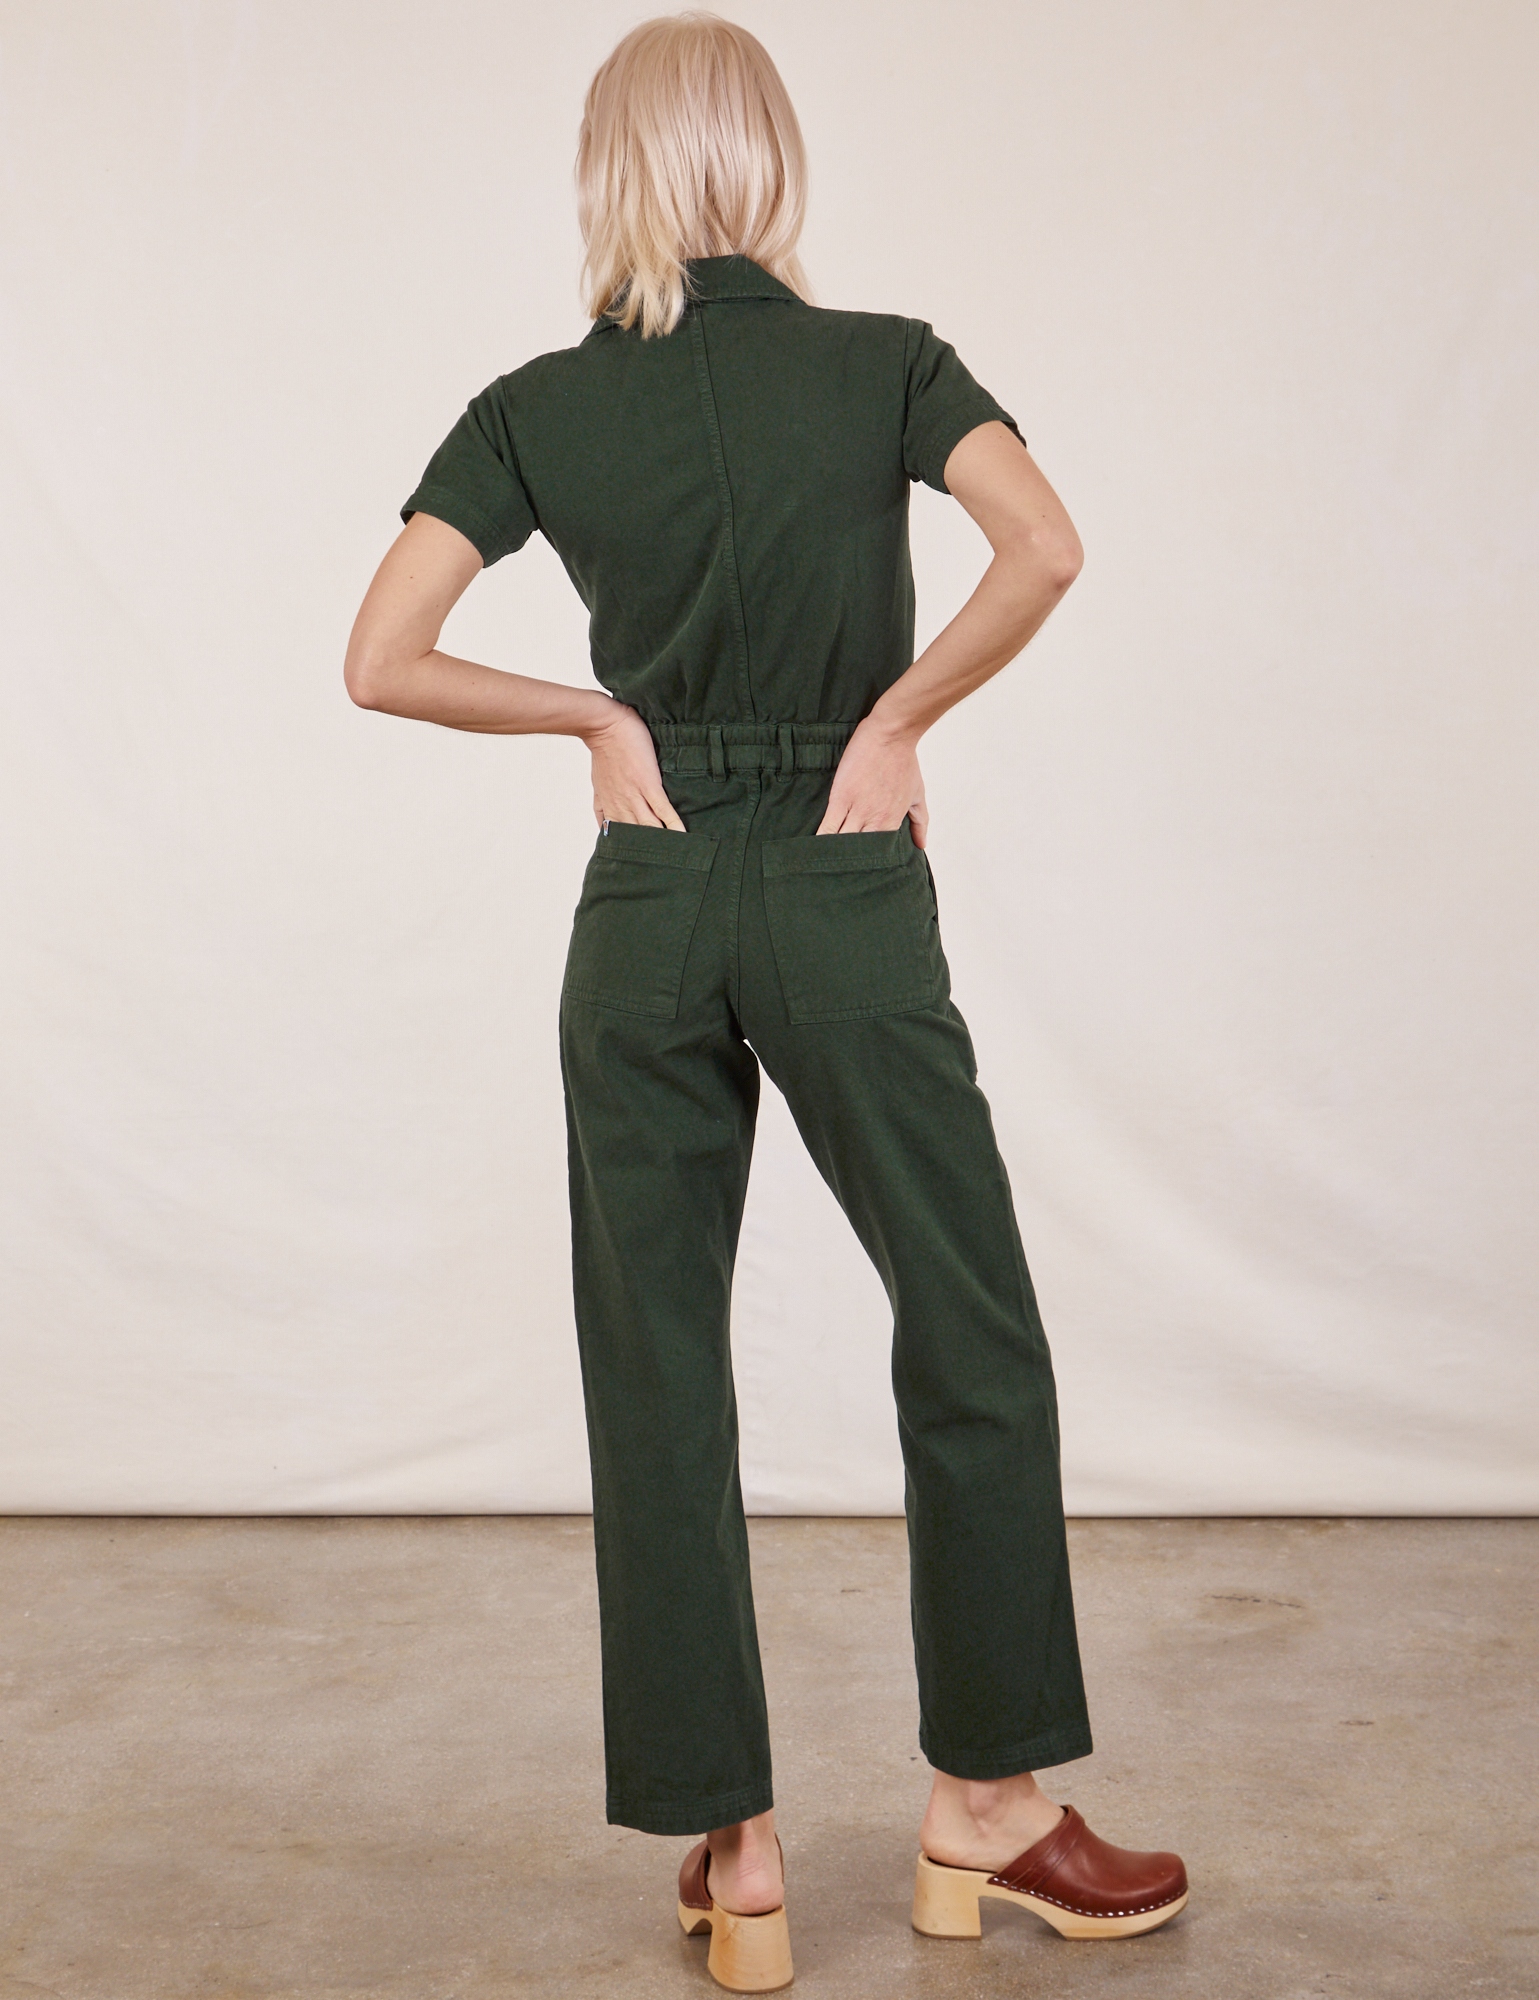 Short Sleeve Jumpsuit in Swamp Green back view on Madeline